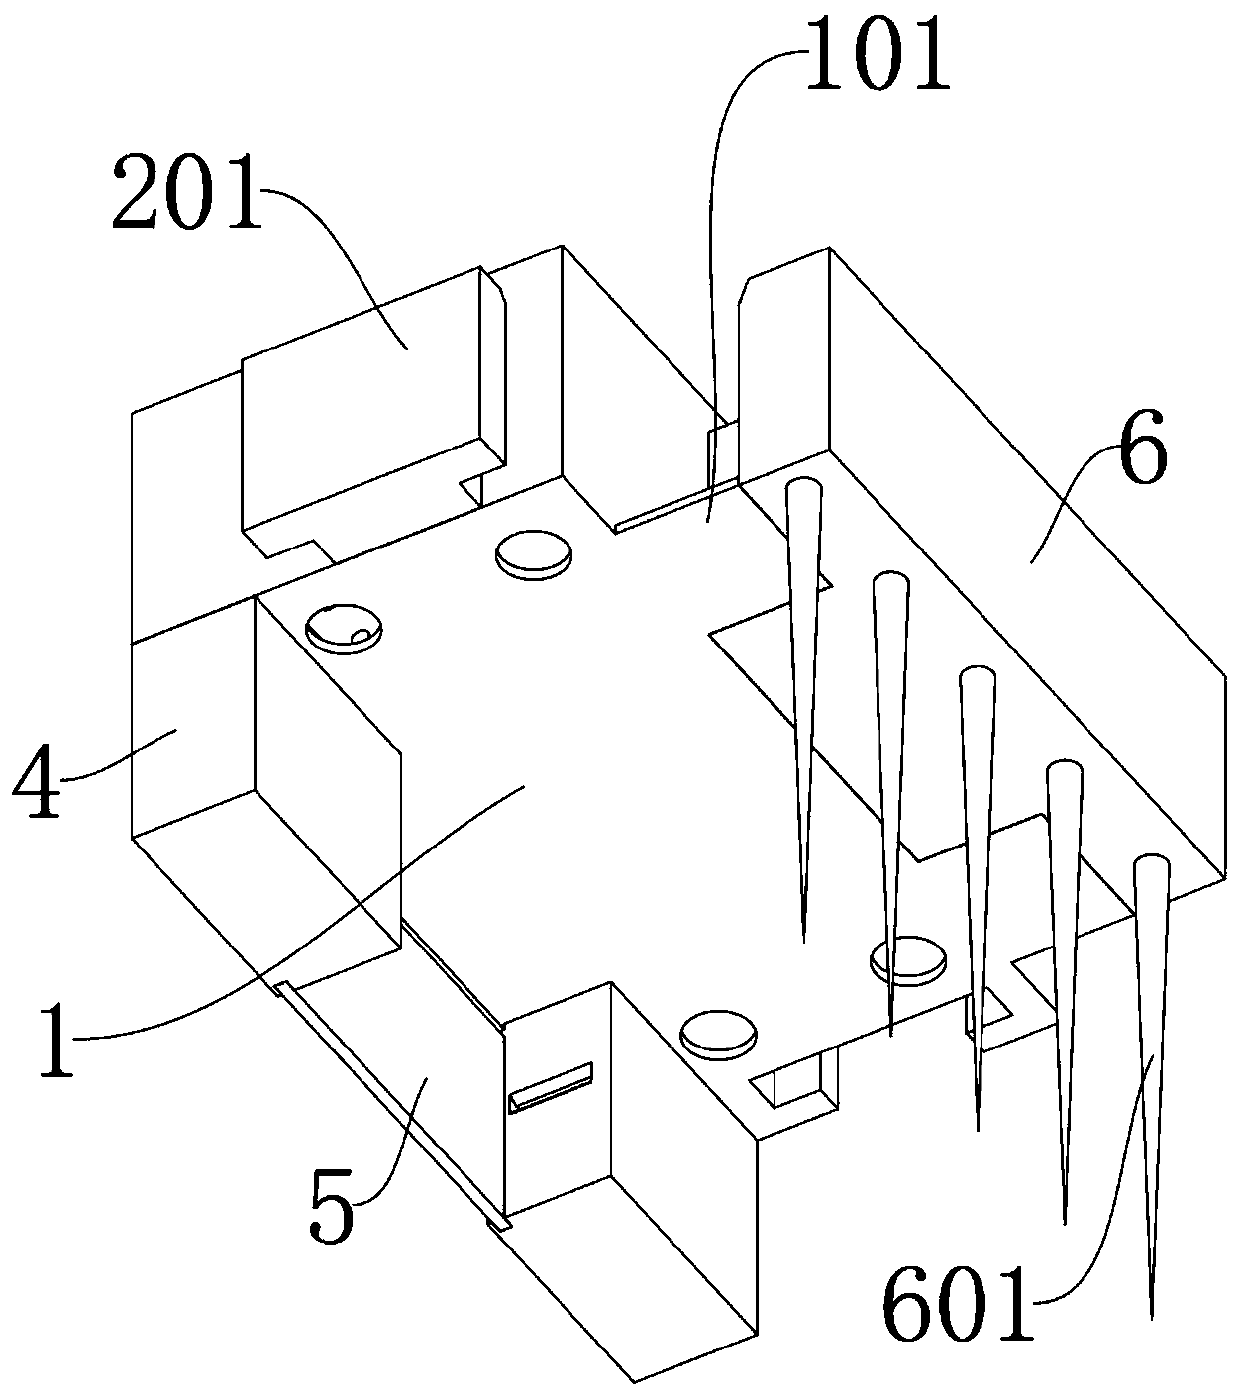 Double-connection-mode ecological building block based on civil construction engineering